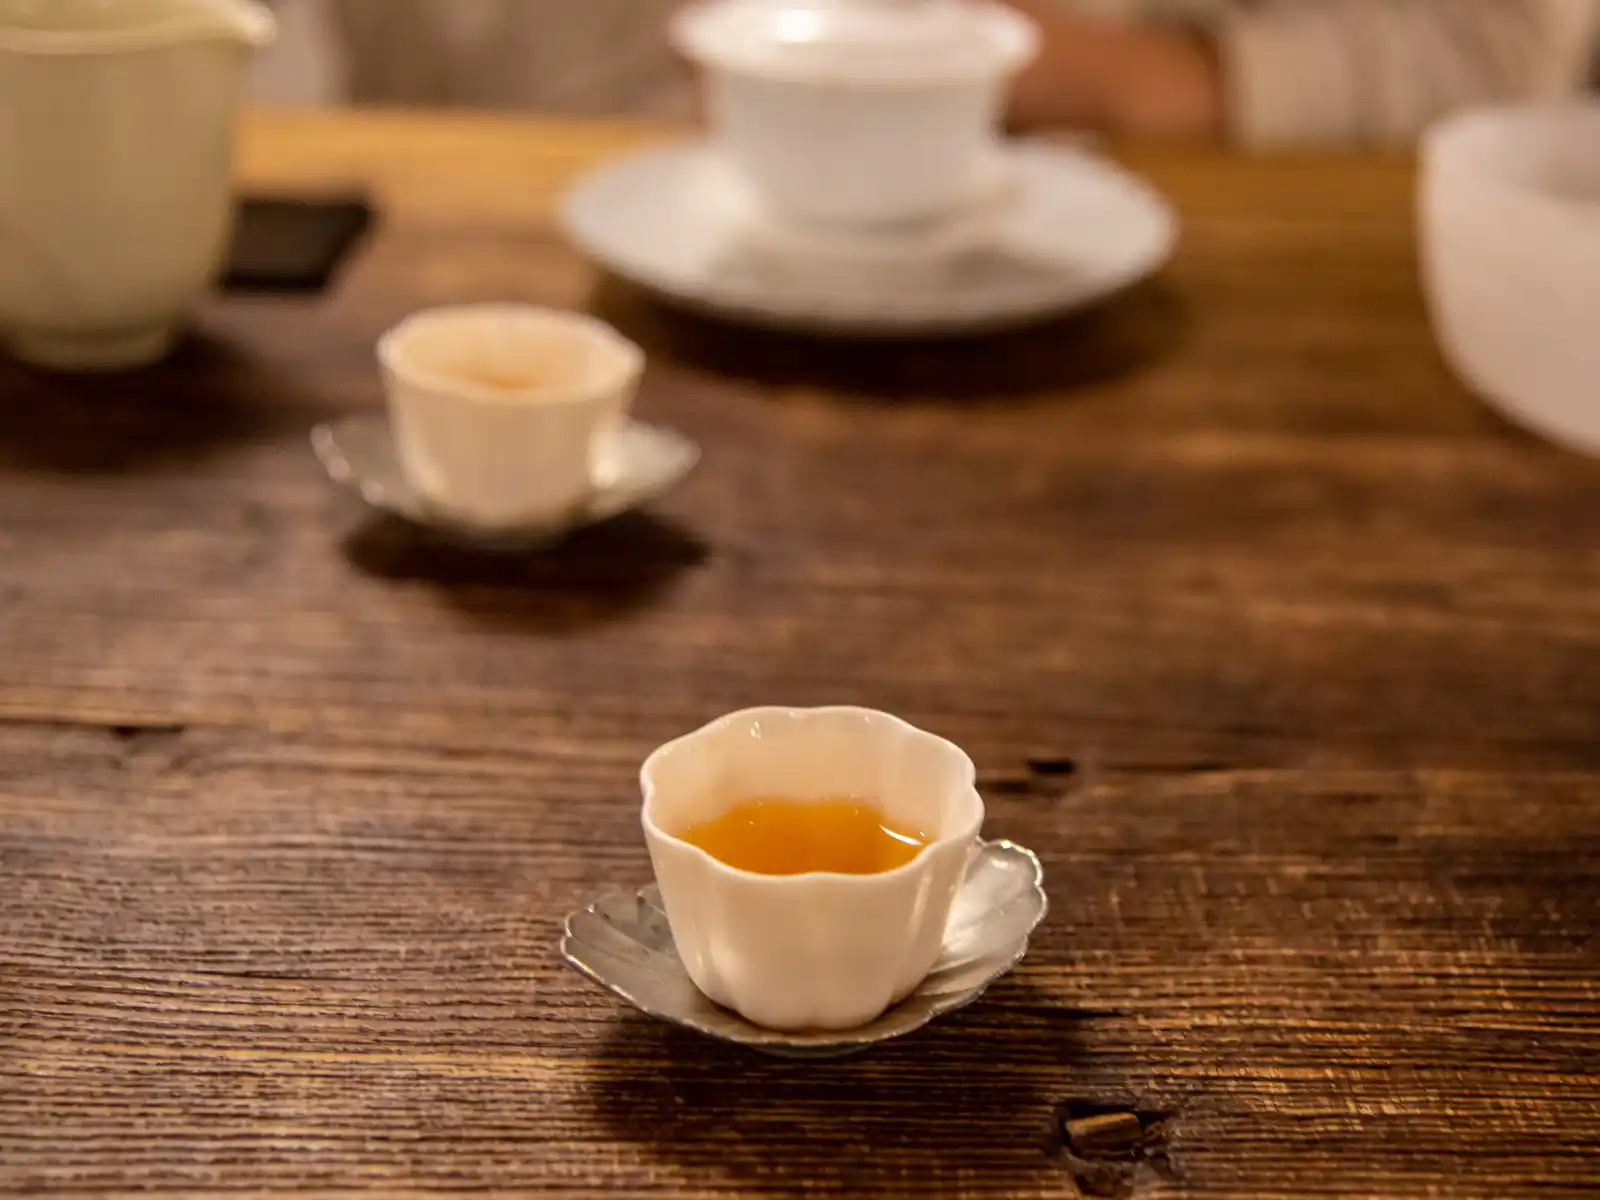 A cup of tea on a wooden table.